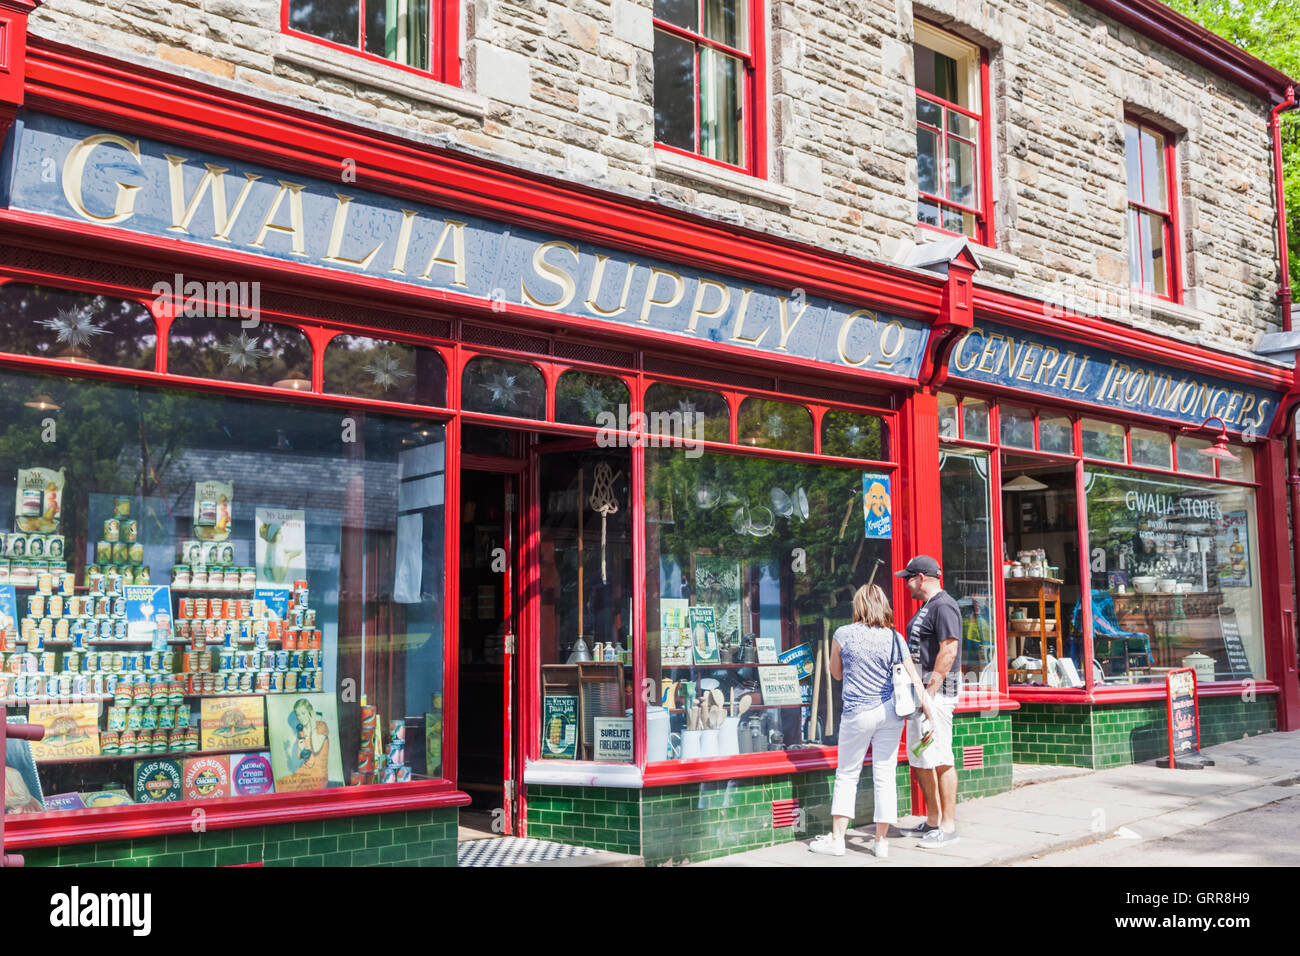 Wales, Cardiff, St Fagan's, Museum of Welsh Life, Gwalia Supply Store Stock Photo